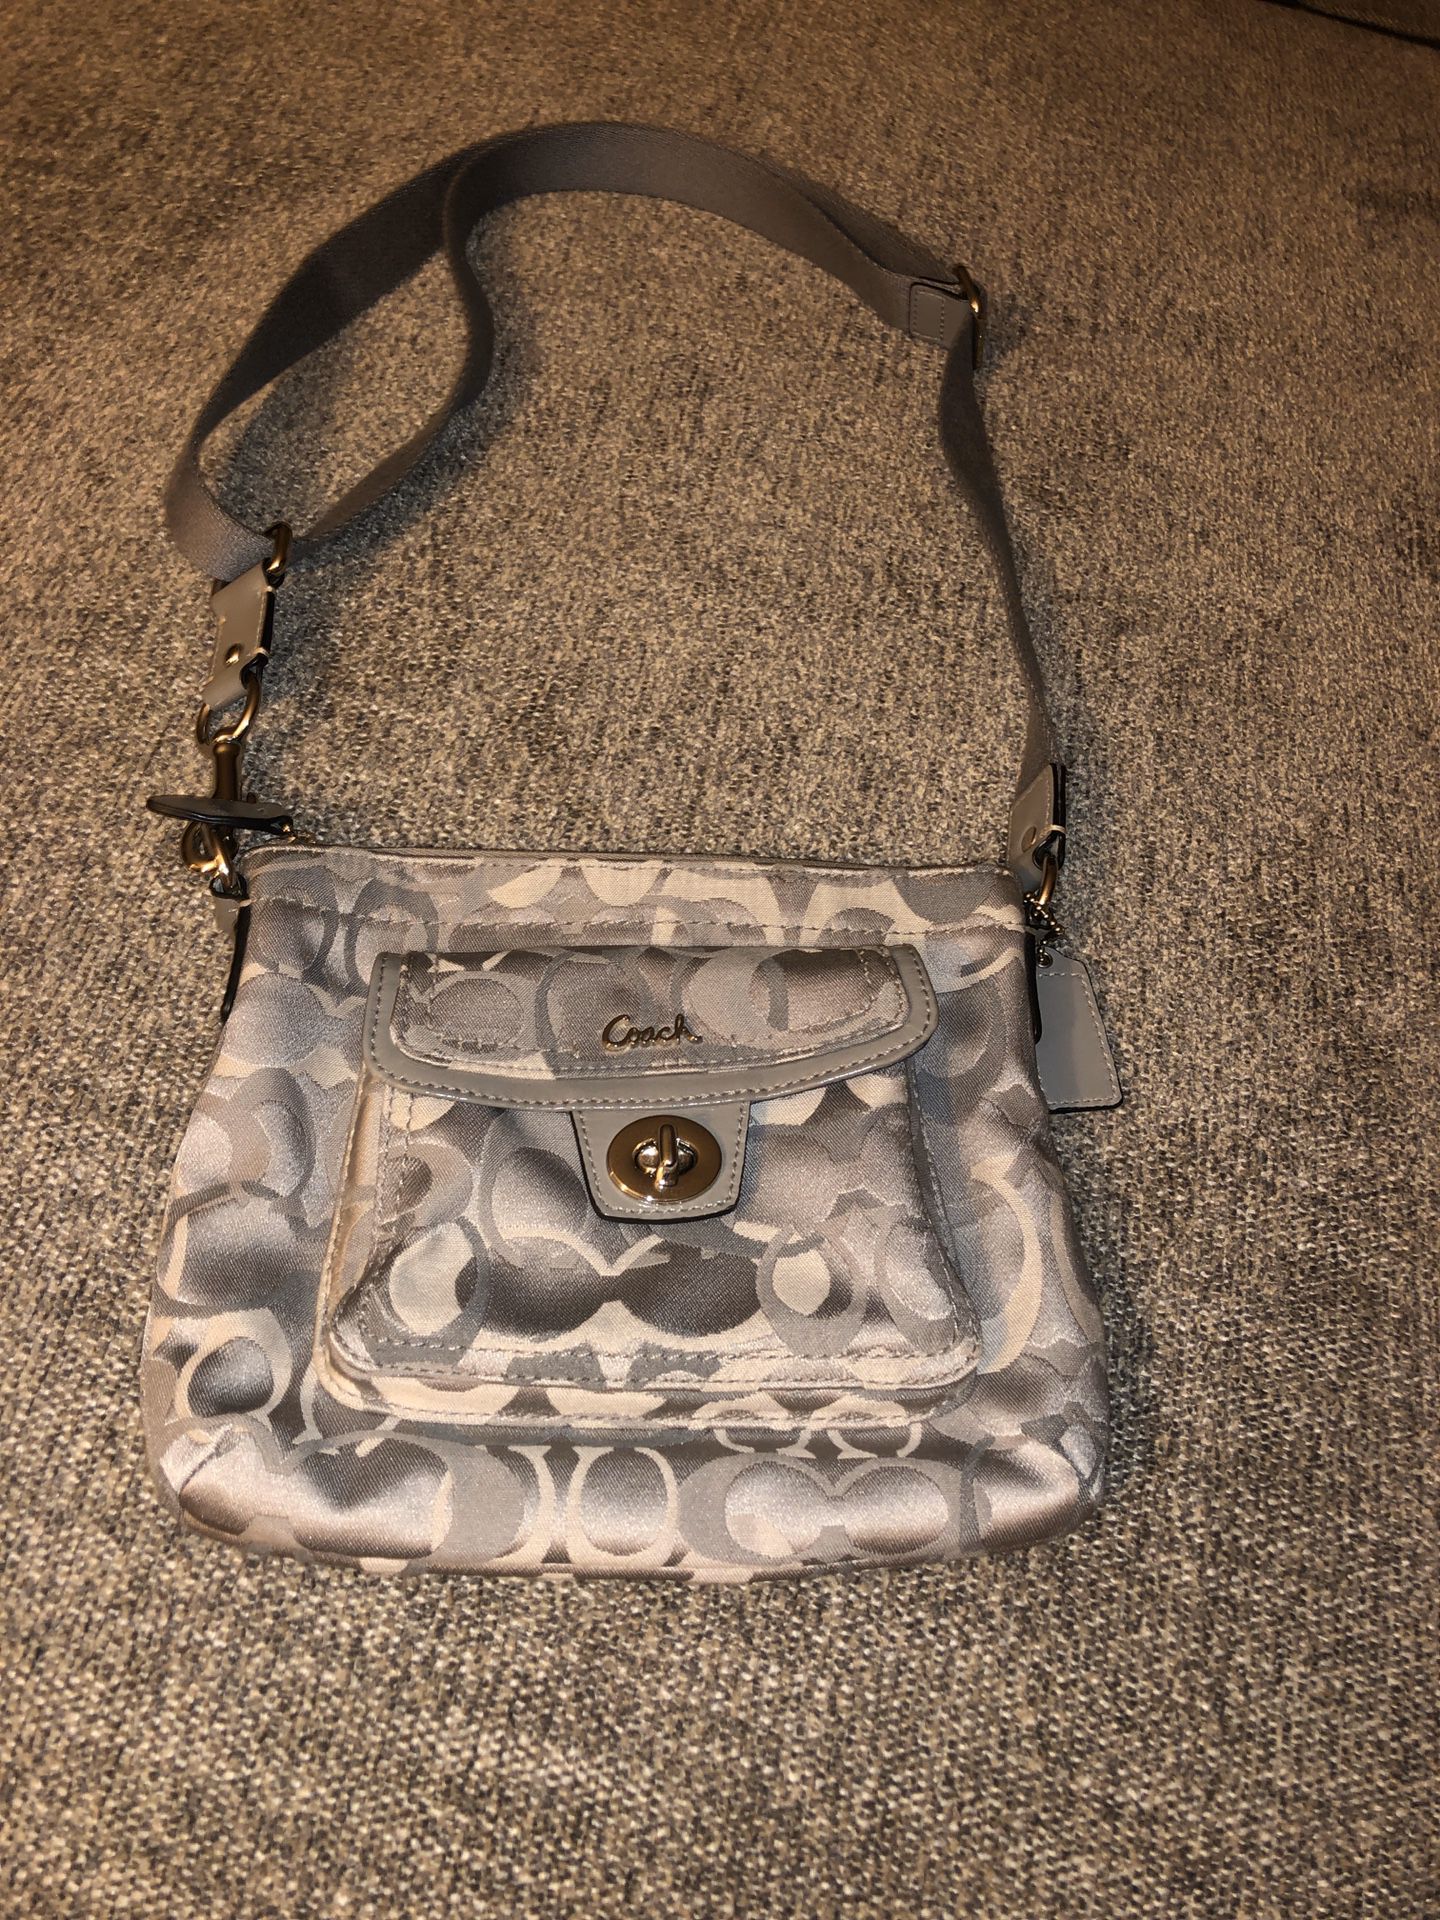 Grey authentic Coach messenger bag like new! No stains, rips, tears etc $30 p/u *additional pics sent upon request